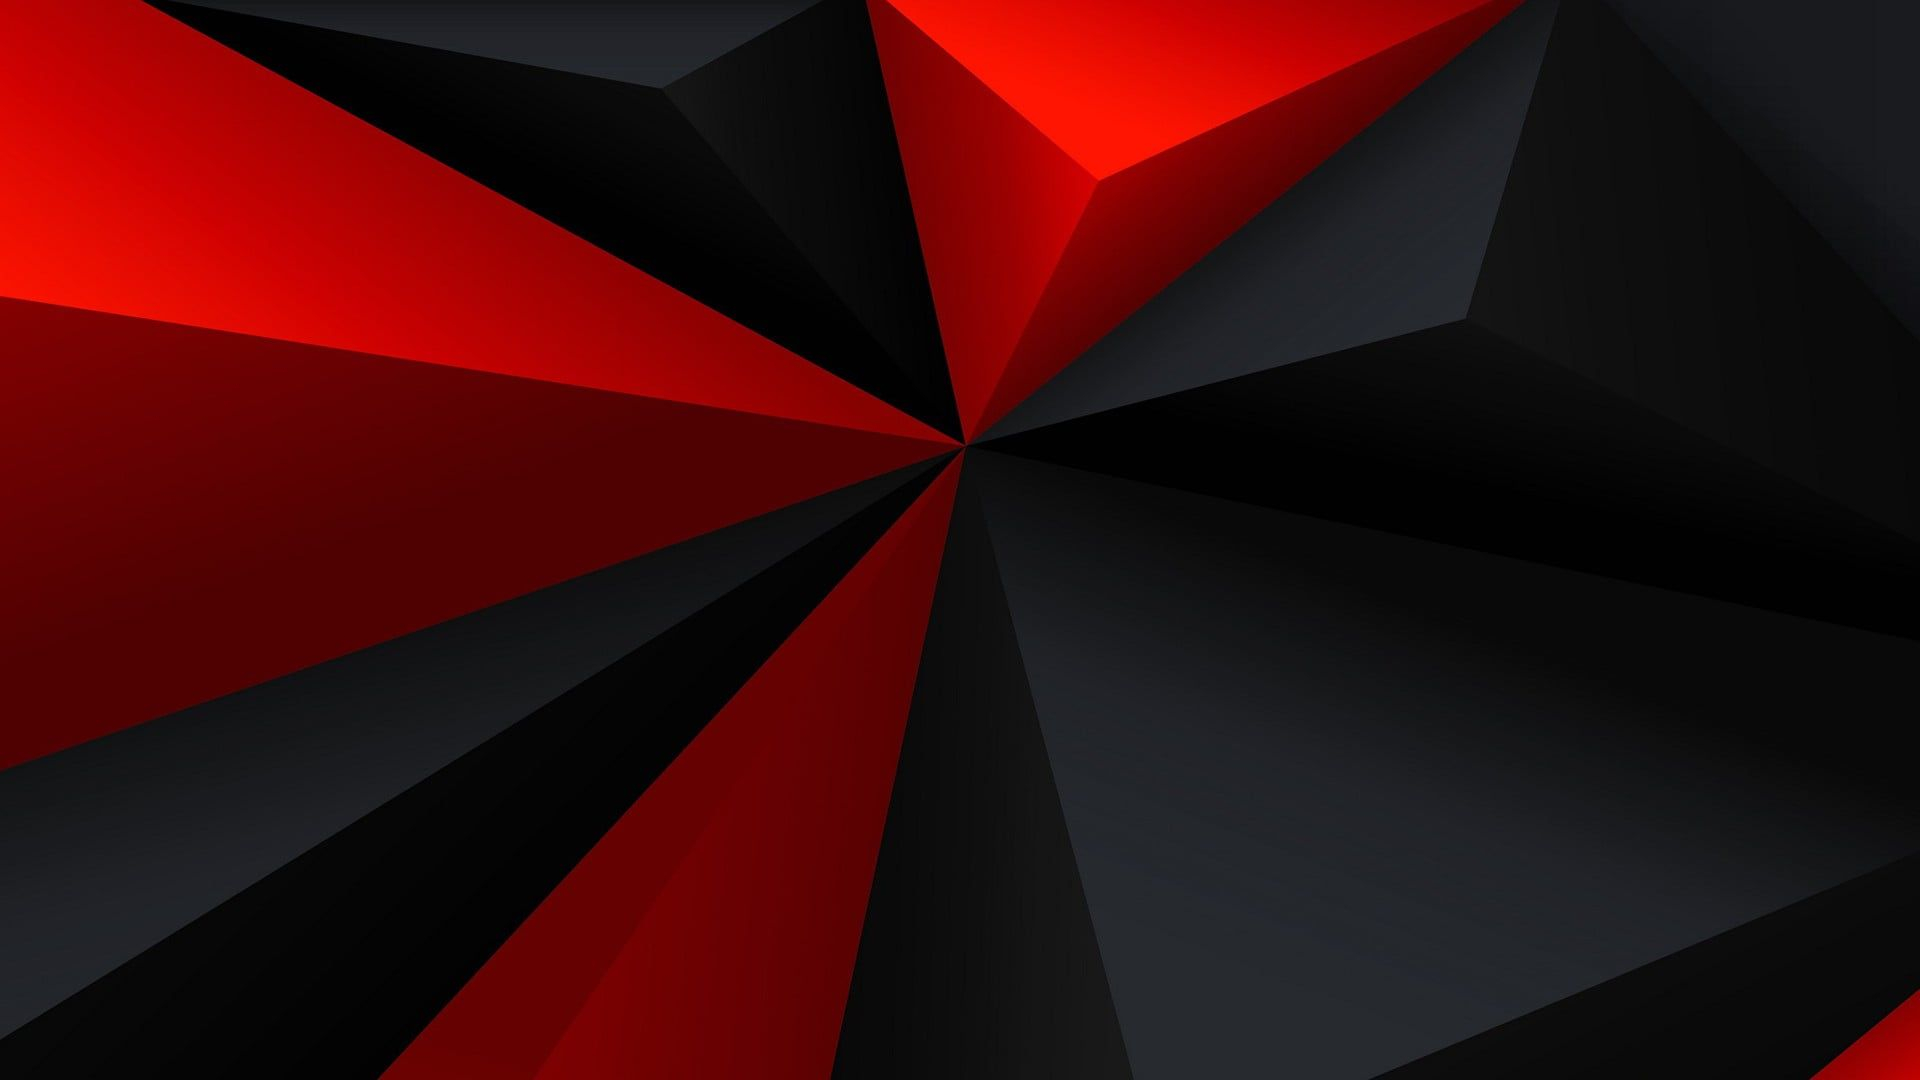 1920x1080 red and black 3D wallpaper digital art #minimalism low poly #geometry #triangle #red #black #g&acirc;&#128;&brvbar; | Red and black wallpaper, Black wallpaper, Red and black background